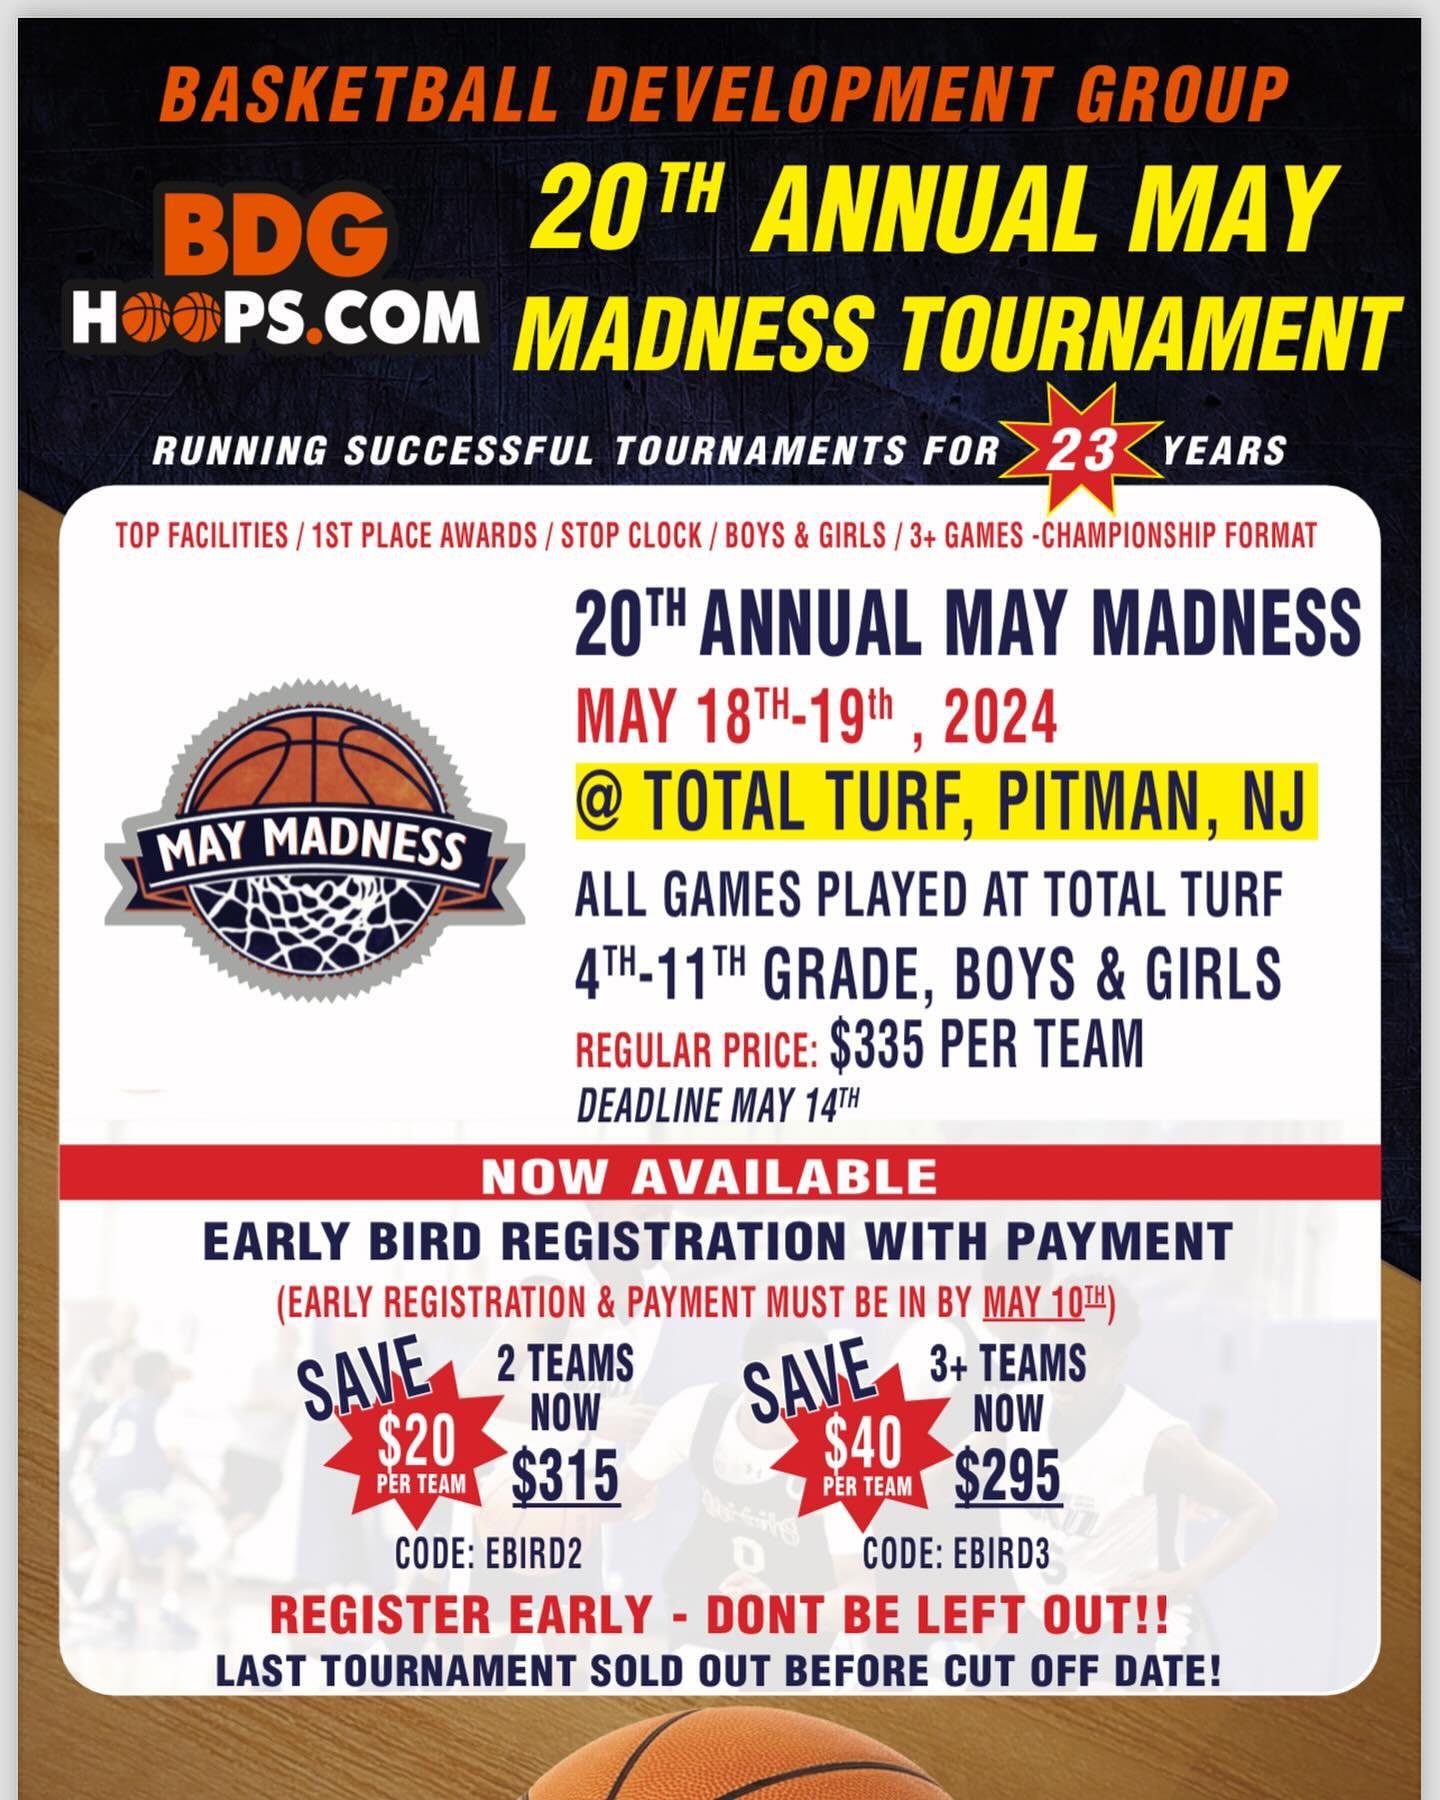 🔥WE STILL HAVE SPACE FOR GIRLS &amp; BOYS TEAMS!  BUT THEY ARE GOING FAST SO REGISTER NOW AT WWW.BDGHOOPS.COM🔥